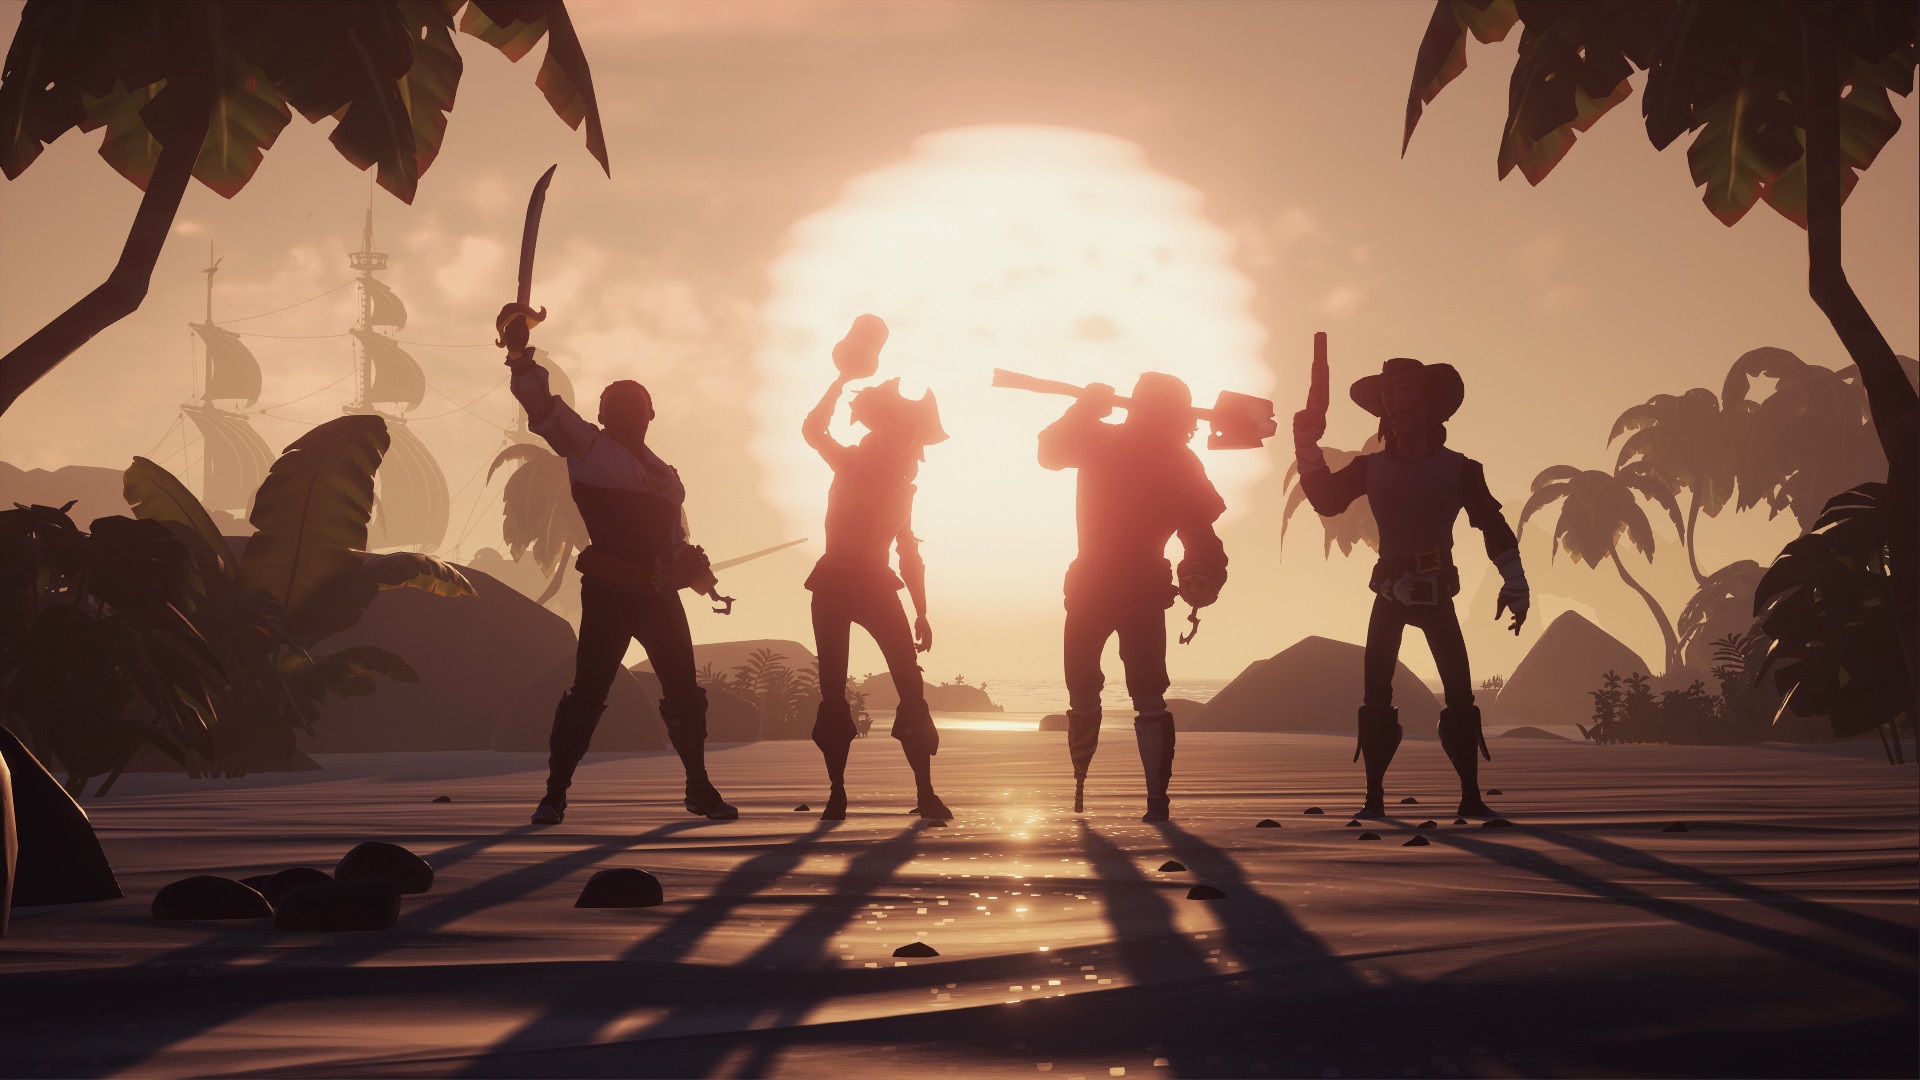 How to add friends in Sea of Thieves